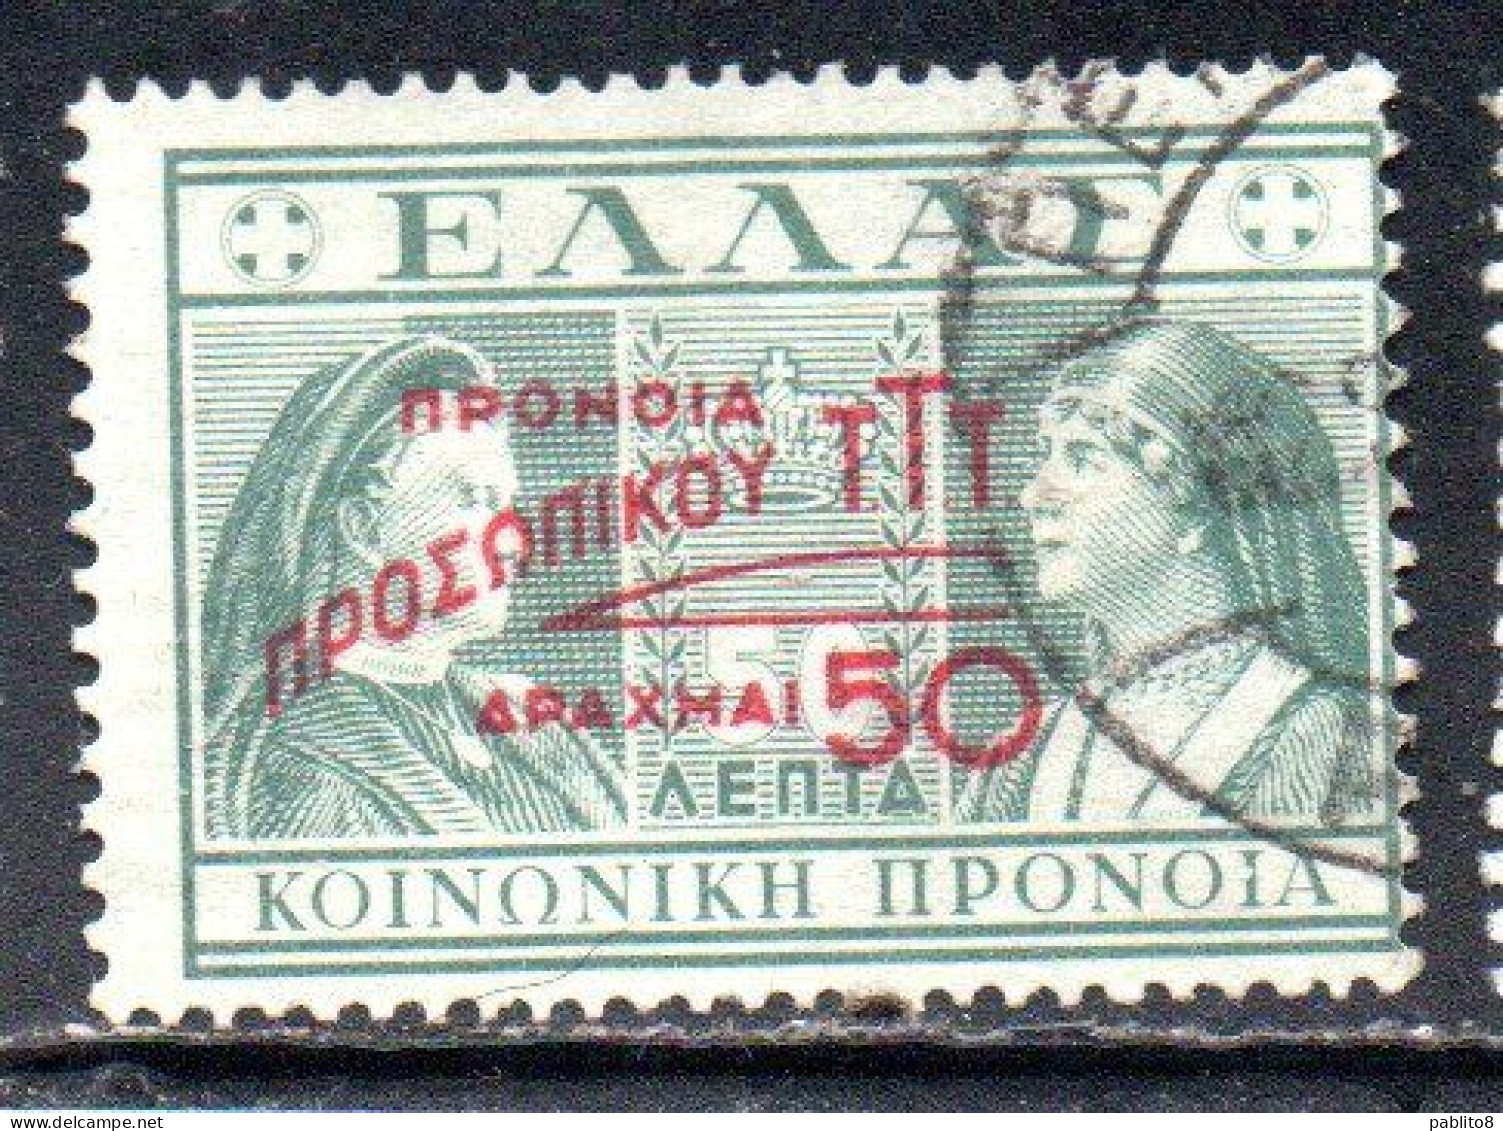 GREECE GRECIA ELLAS 1947 POSTAL TAX STAMPS TUBERCULOSIS SURCHARGED 50d On 50l USED USATO OBLITERE' - Revenue Stamps